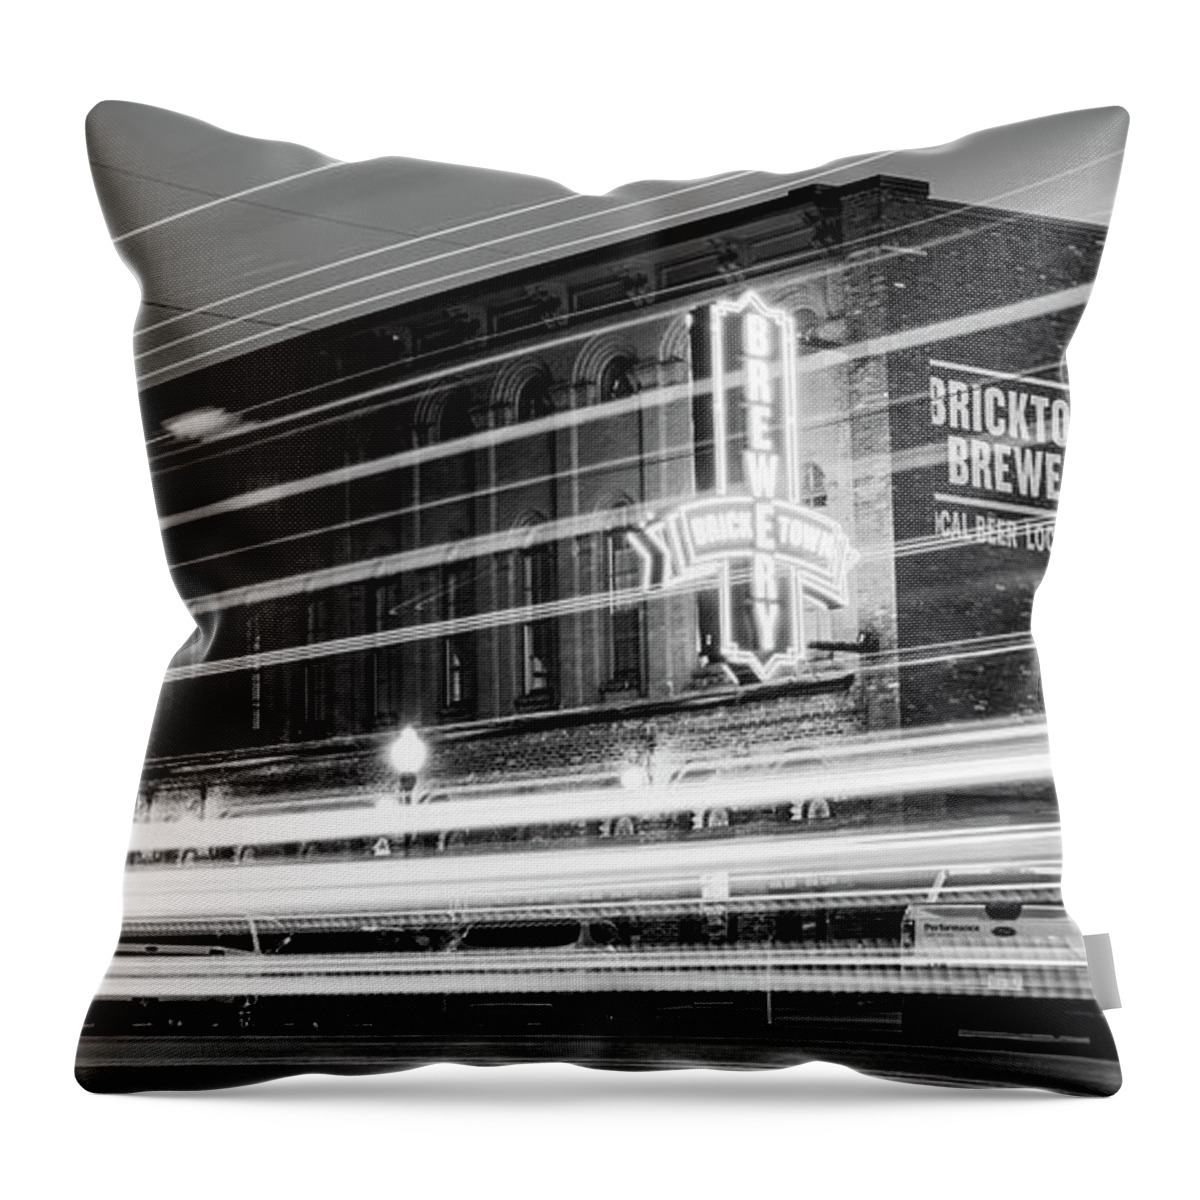 Fort Smith Throw Pillow featuring the photograph Fort Smith Light Trails And Brewery Neon - Monochrome Panorama by Gregory Ballos